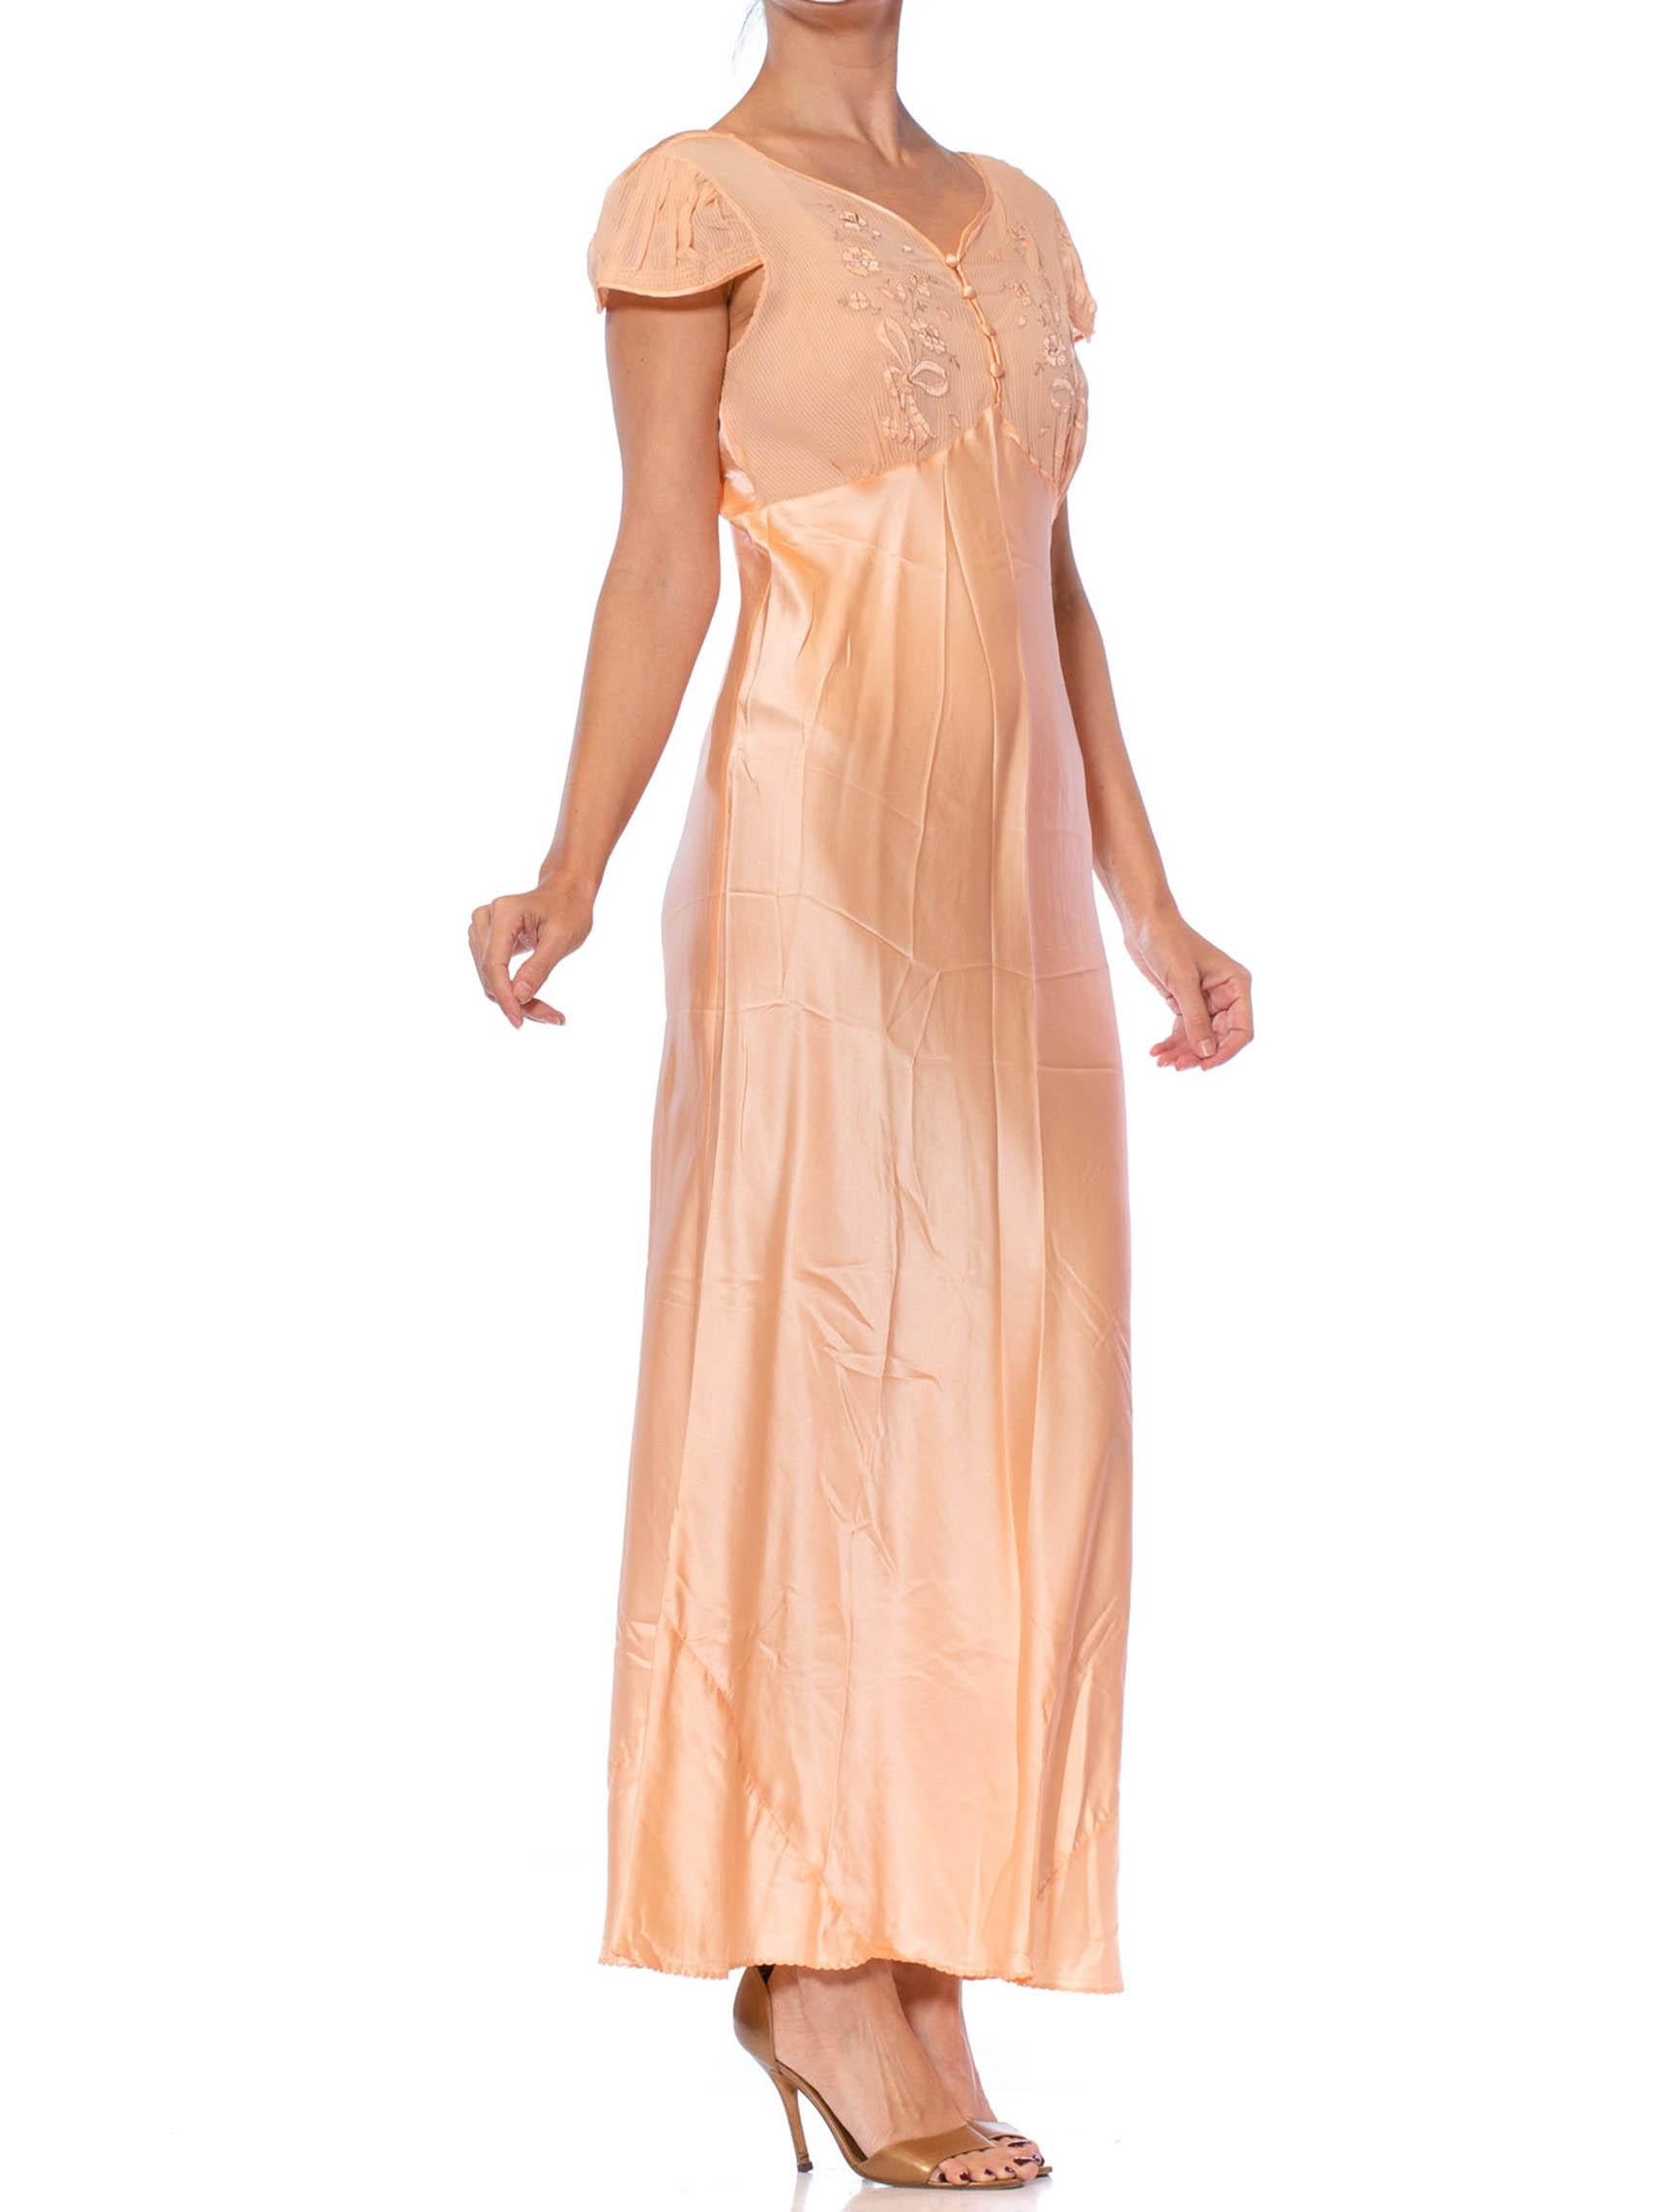 1930S Blush Pink Bias Cut Silk Charmeuse Slip DressNegligee With Sheer Embroider For Sale 4